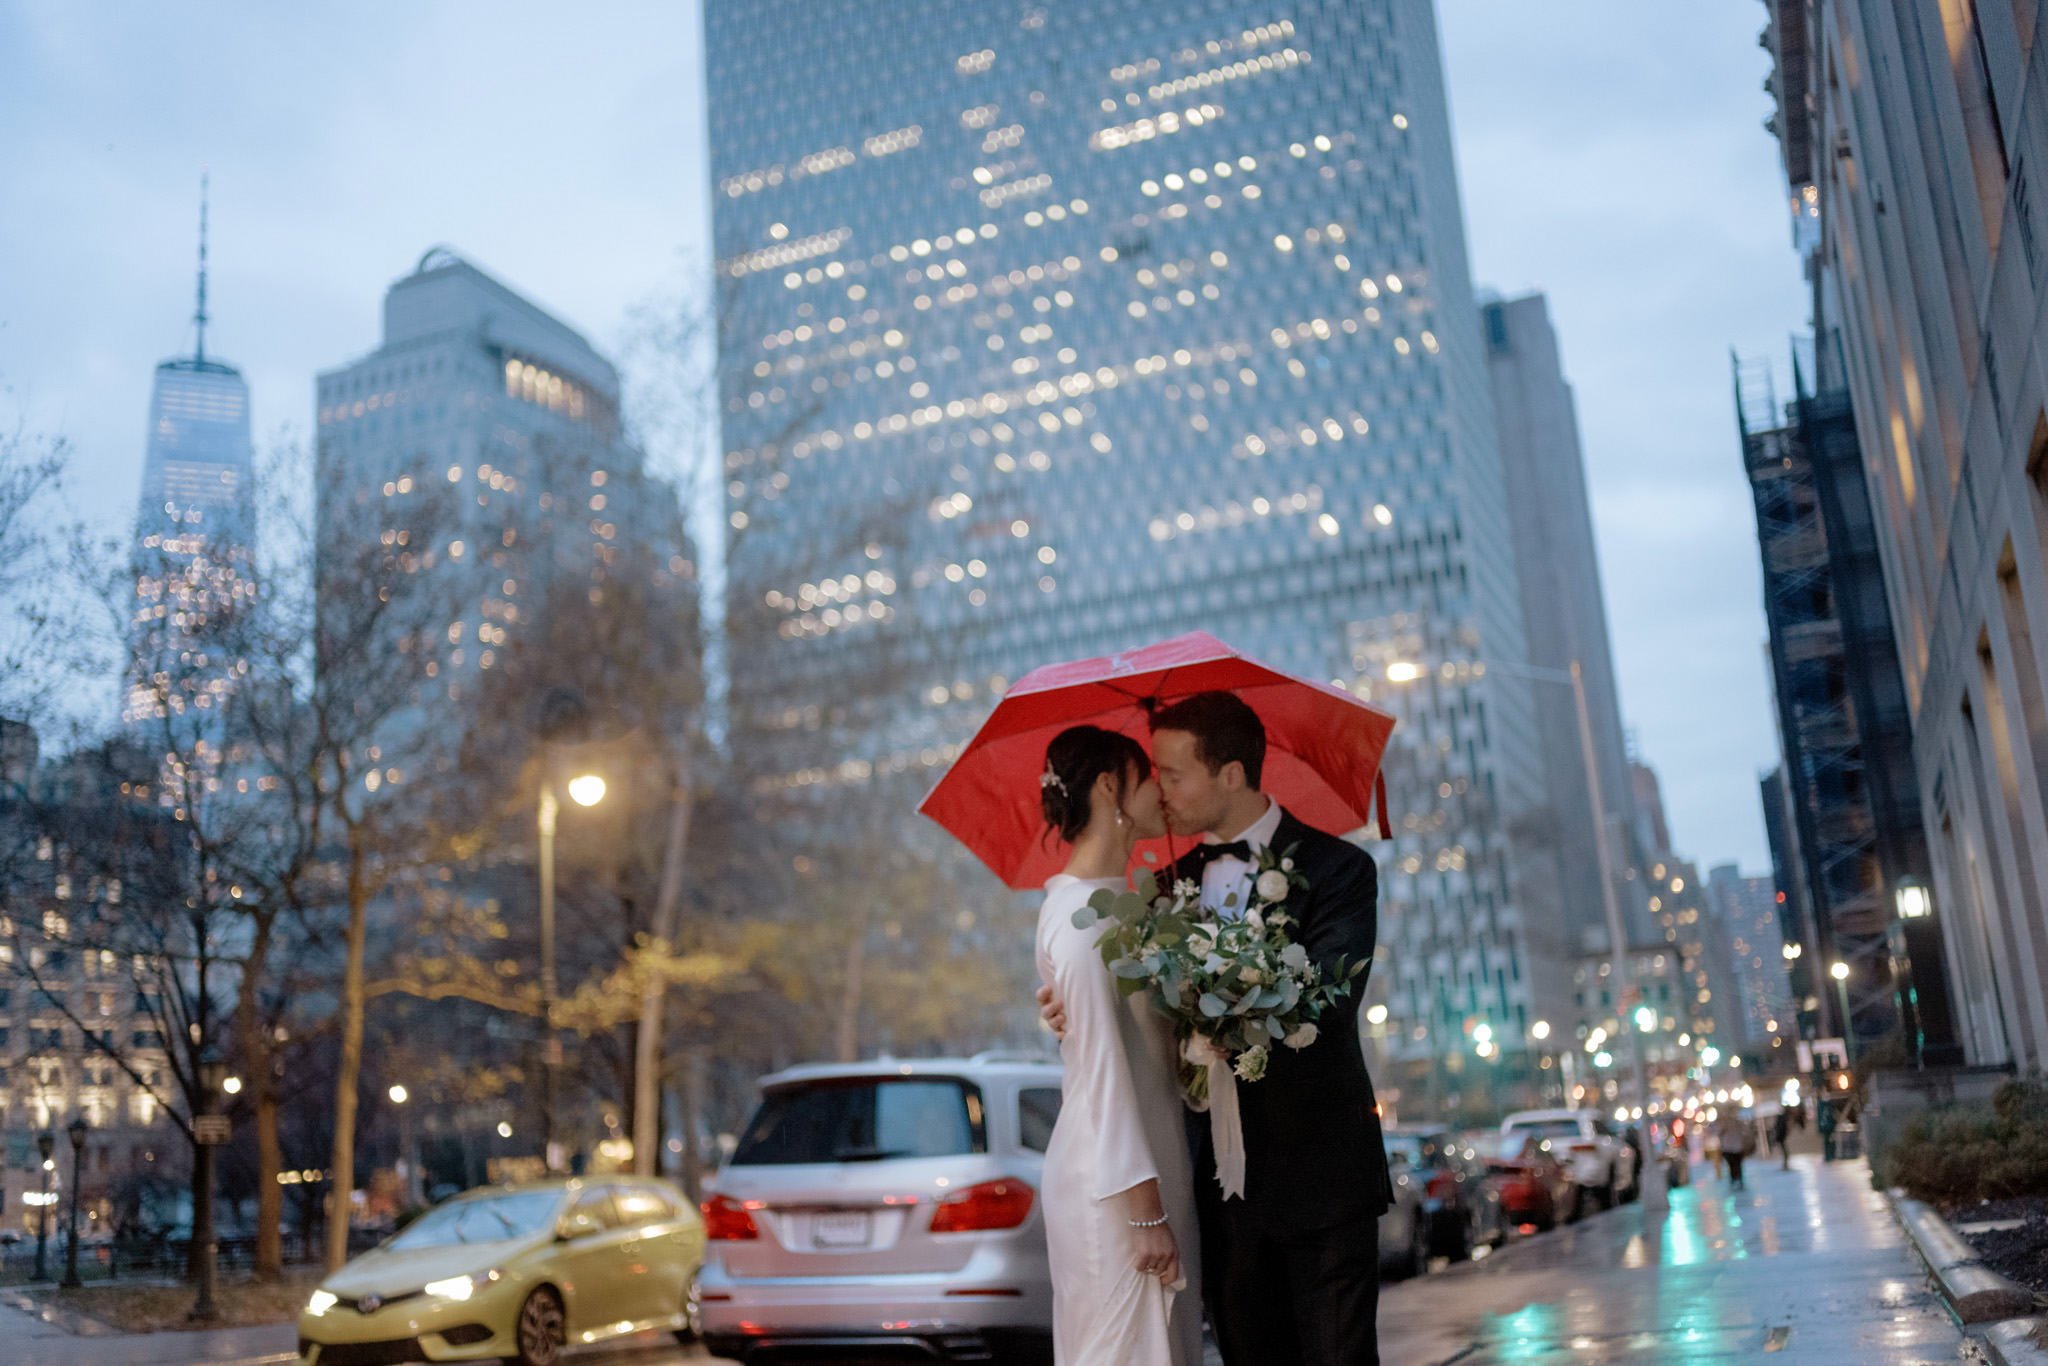 a couple shares a tender kiss under the shelter of a red umbrella, surrounded by the soft glow of city lights during the bewitching blue hour. Following their New York City Hall elopement, the rain-kissed streets add a poetic touch to the scene, weaving an intimate tapestry of love against the urban backdrop